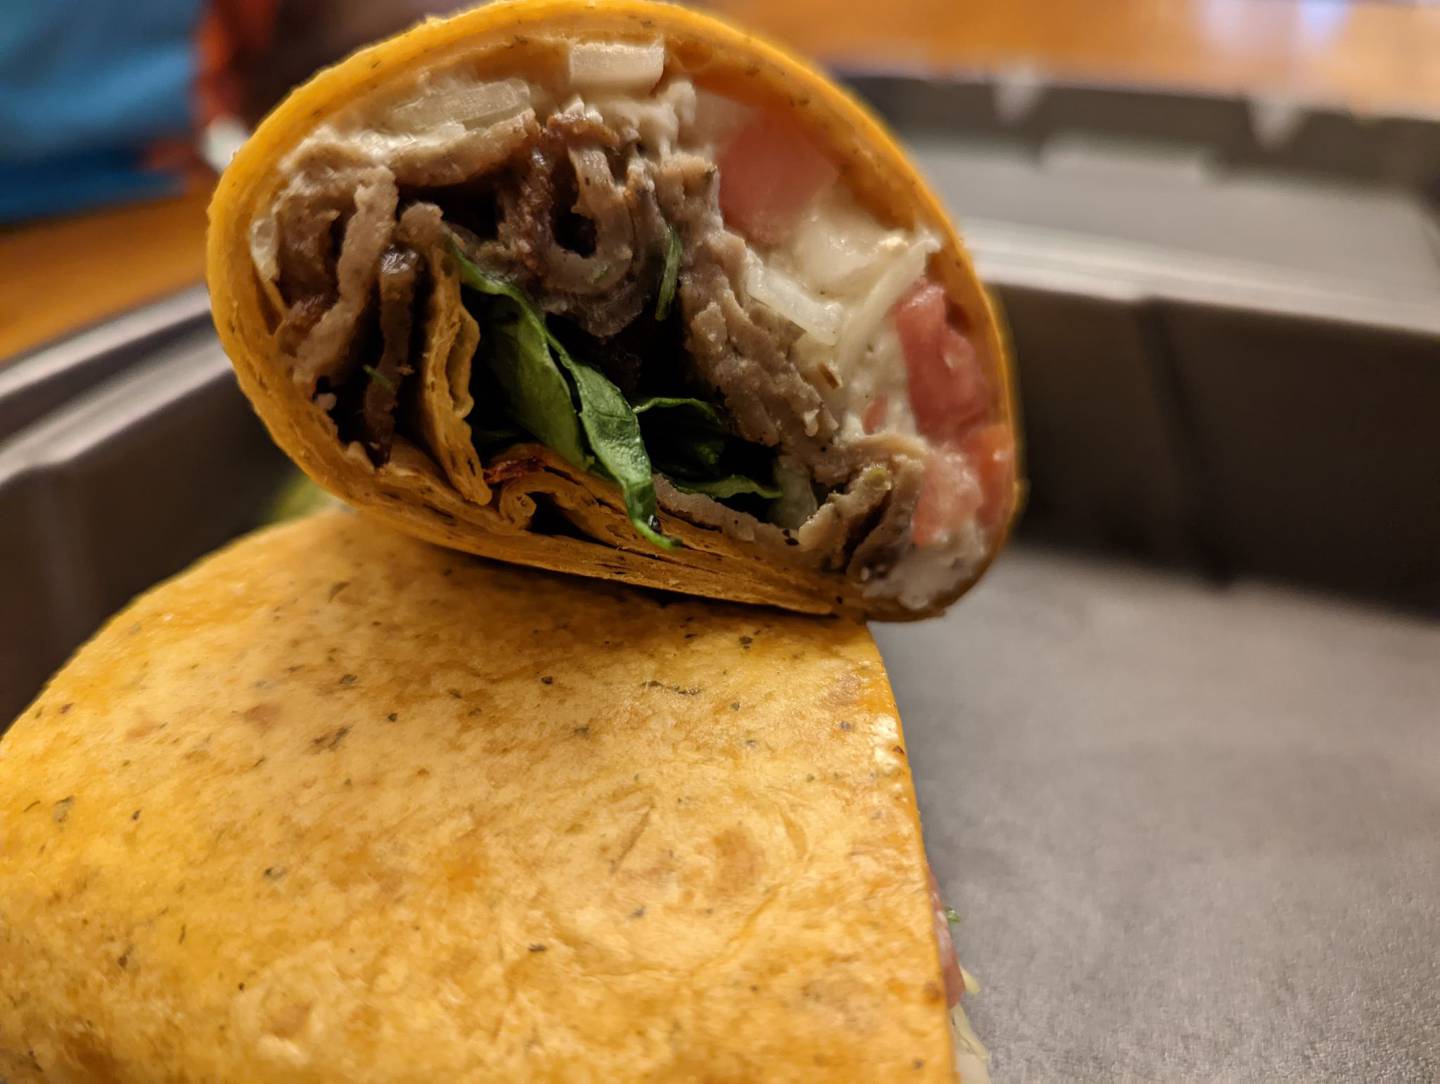 Pictured is the Mediterranean wrap for $9 at Happy Place Cafe in Shorewood. This wrap is filled with gyro meat, chopped lettuce, tomatoes, onions, feta cheese and Greek dressing.